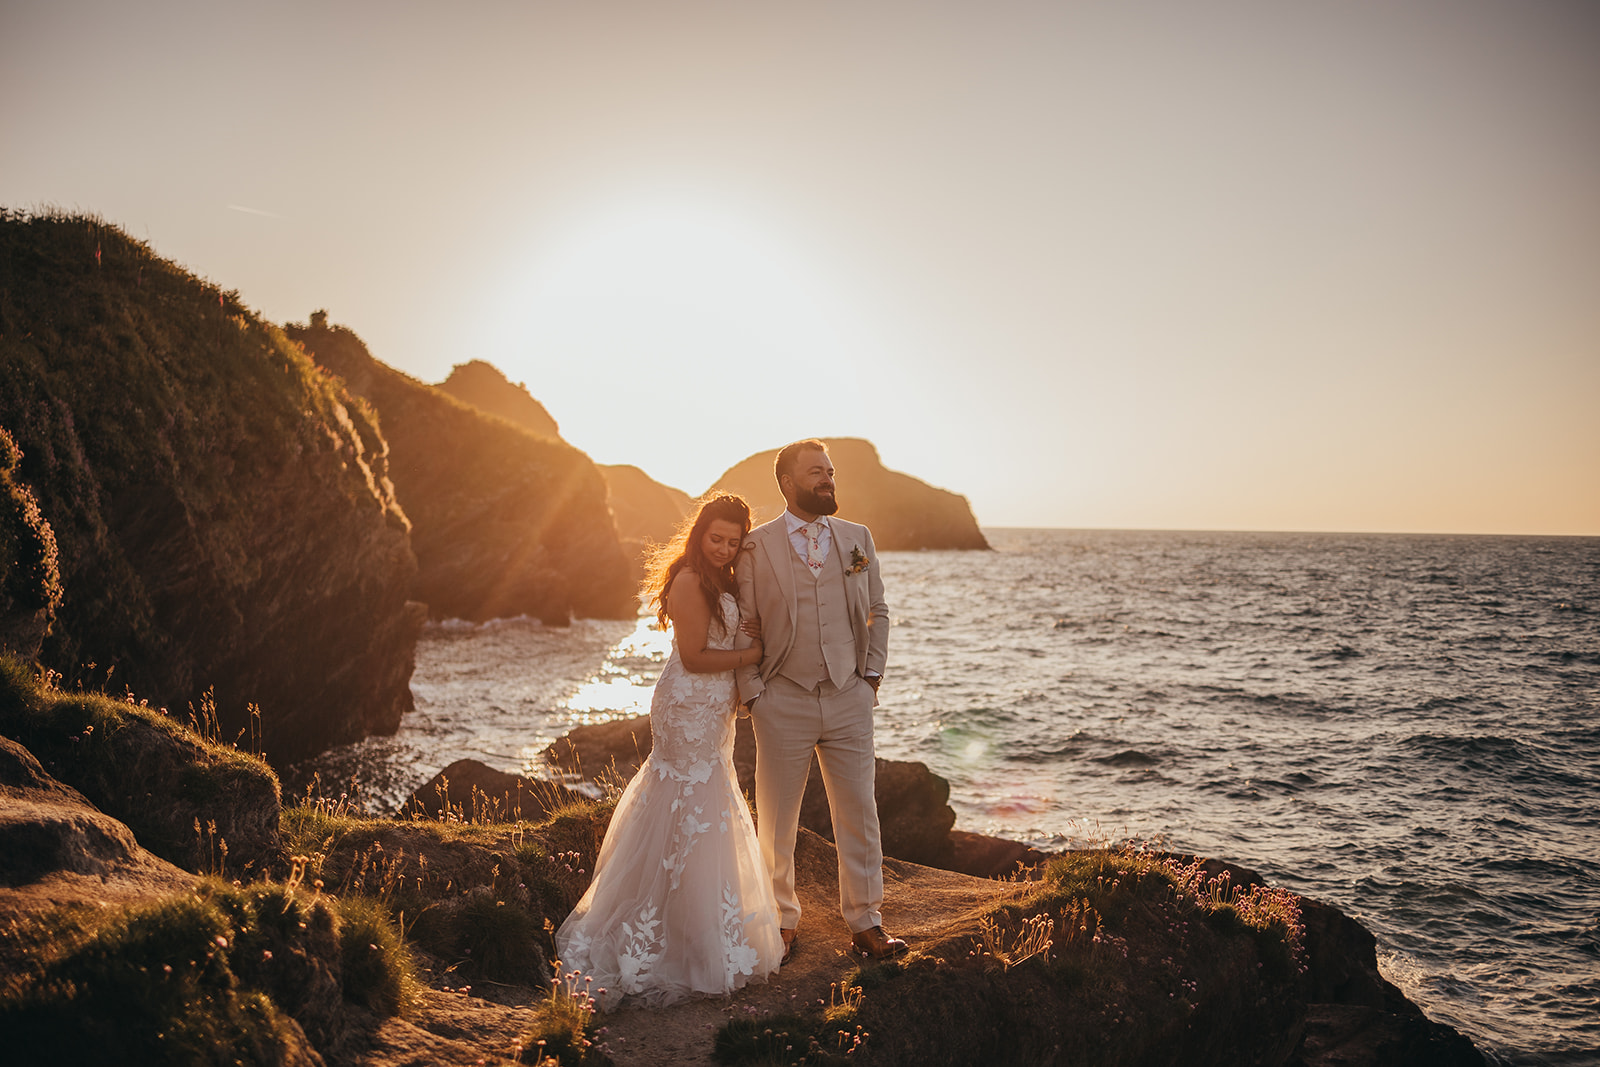 Bride and Groom, stood upon a rock on the cliffs over looking the sea, sea breeze in the air as the sun sets, casting a golden hue across the land.